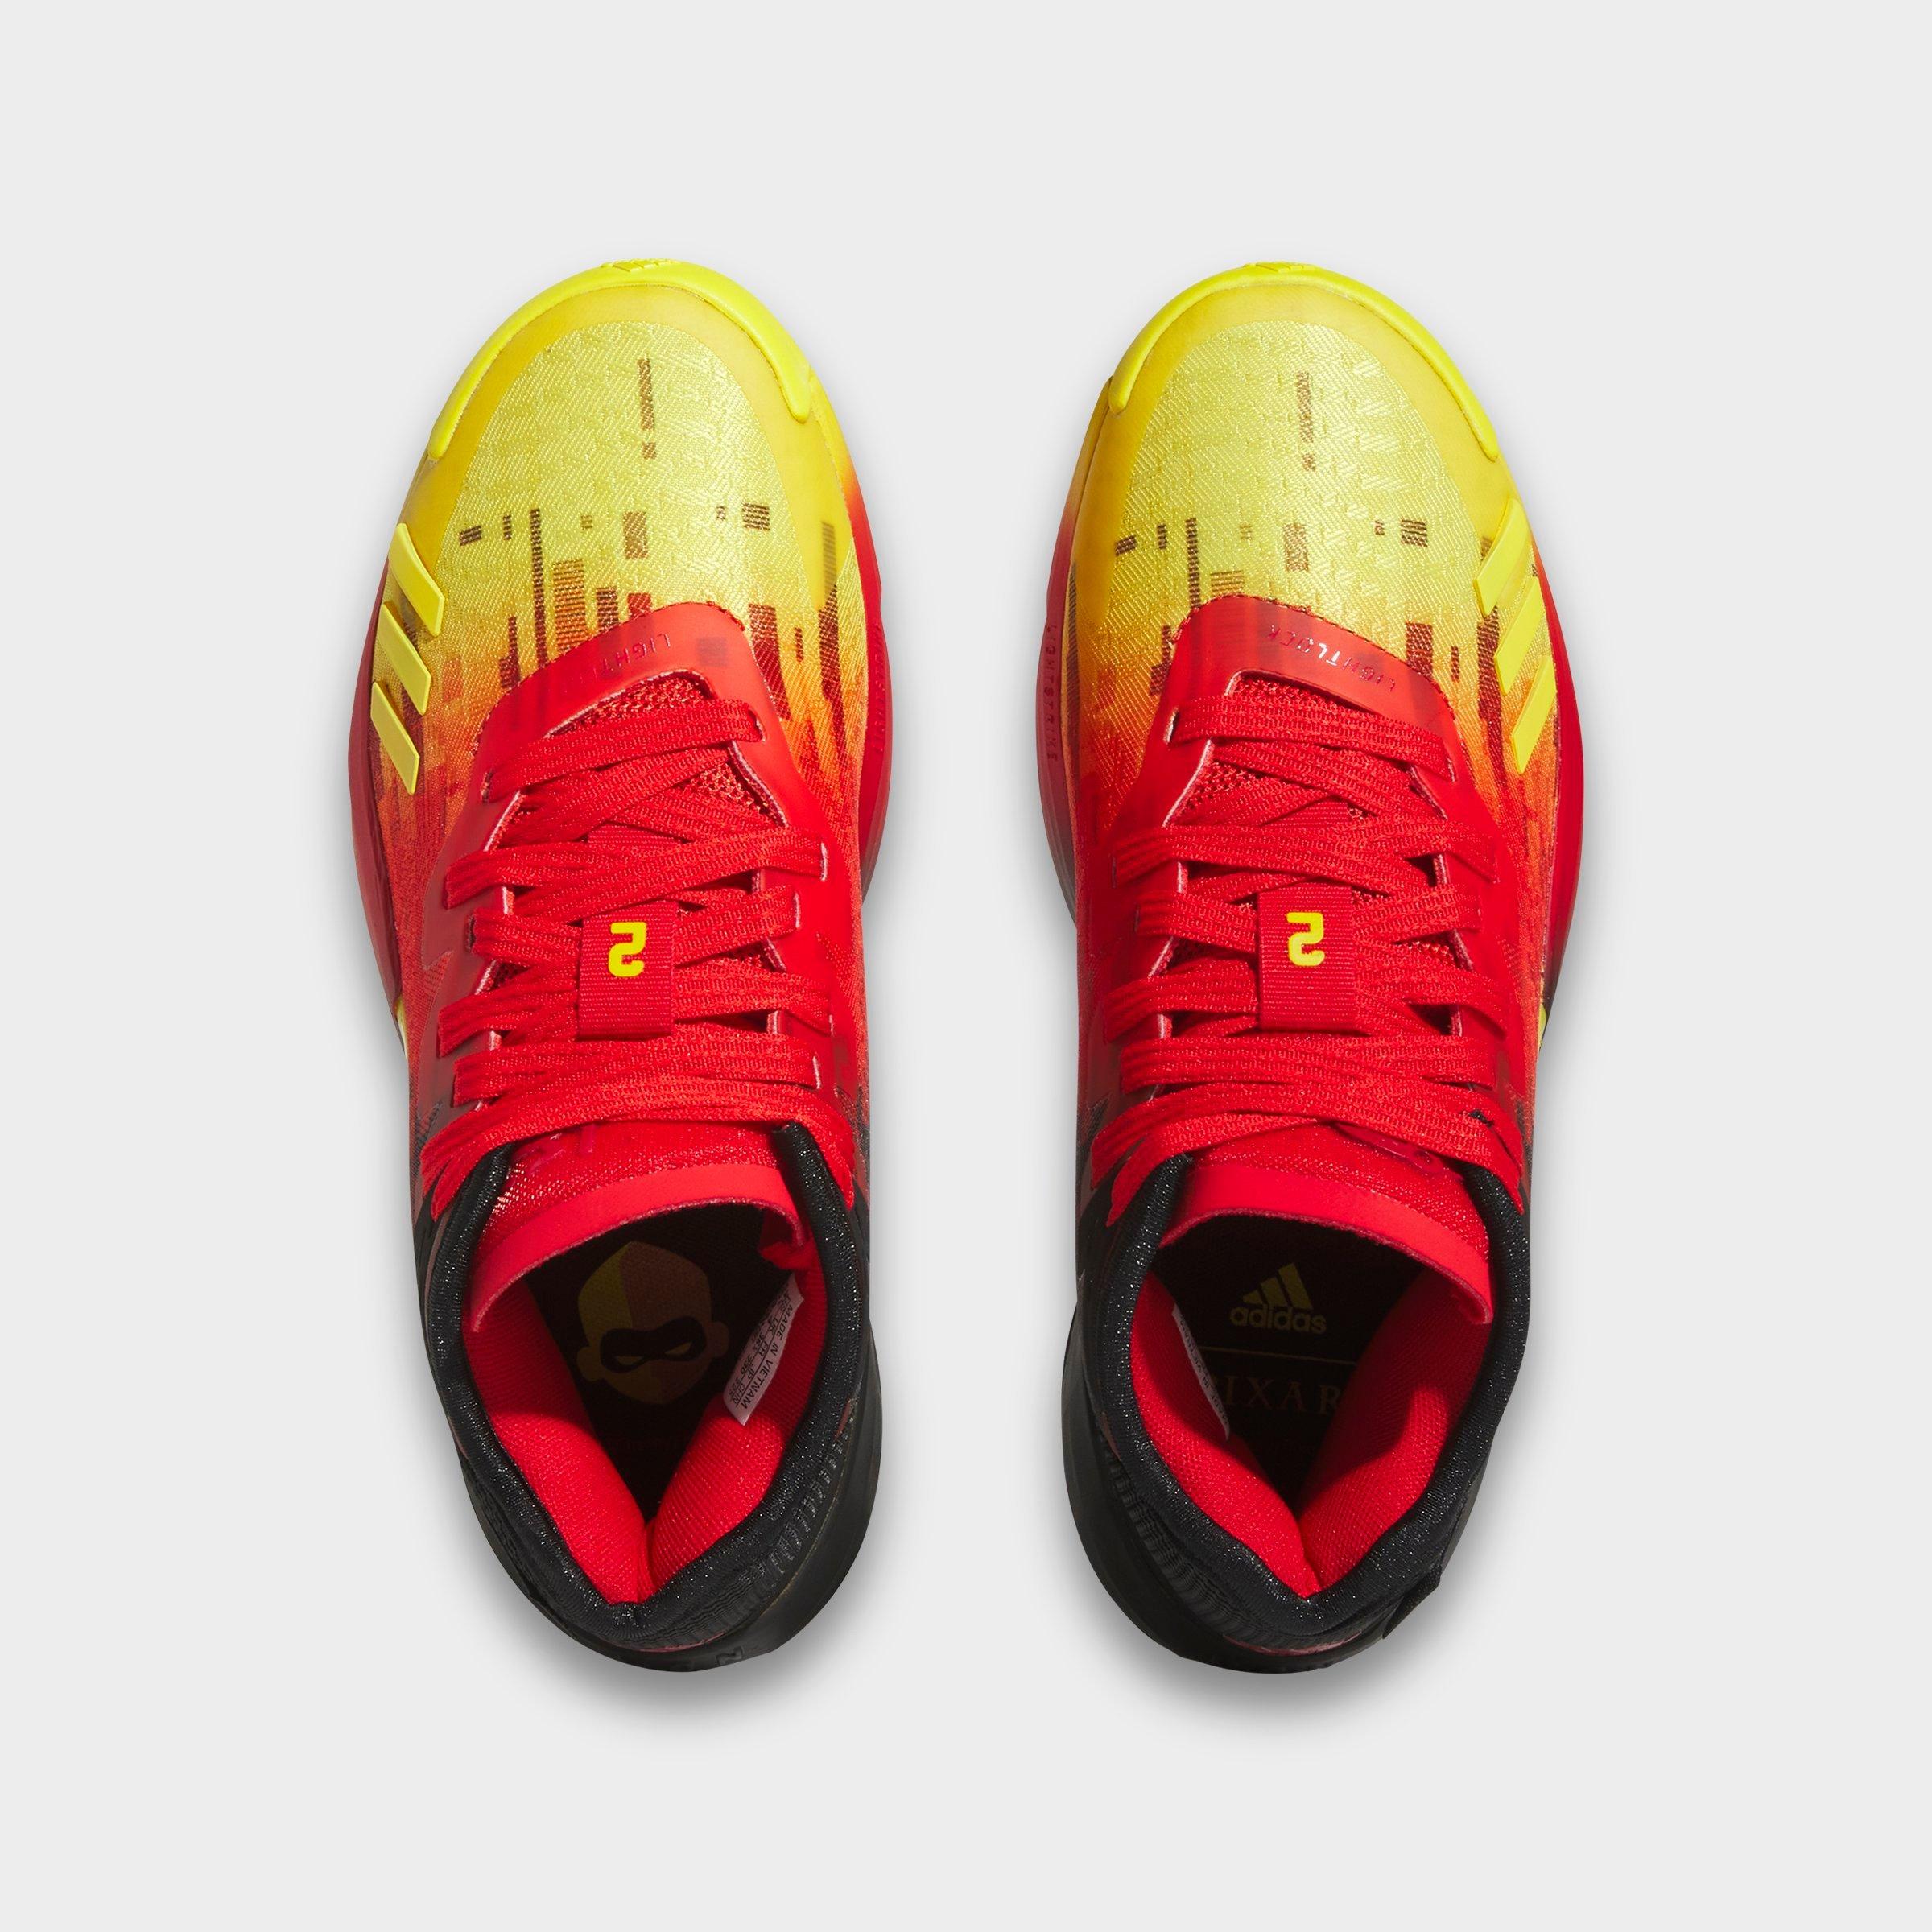 adidas yellow and red basketball shoes